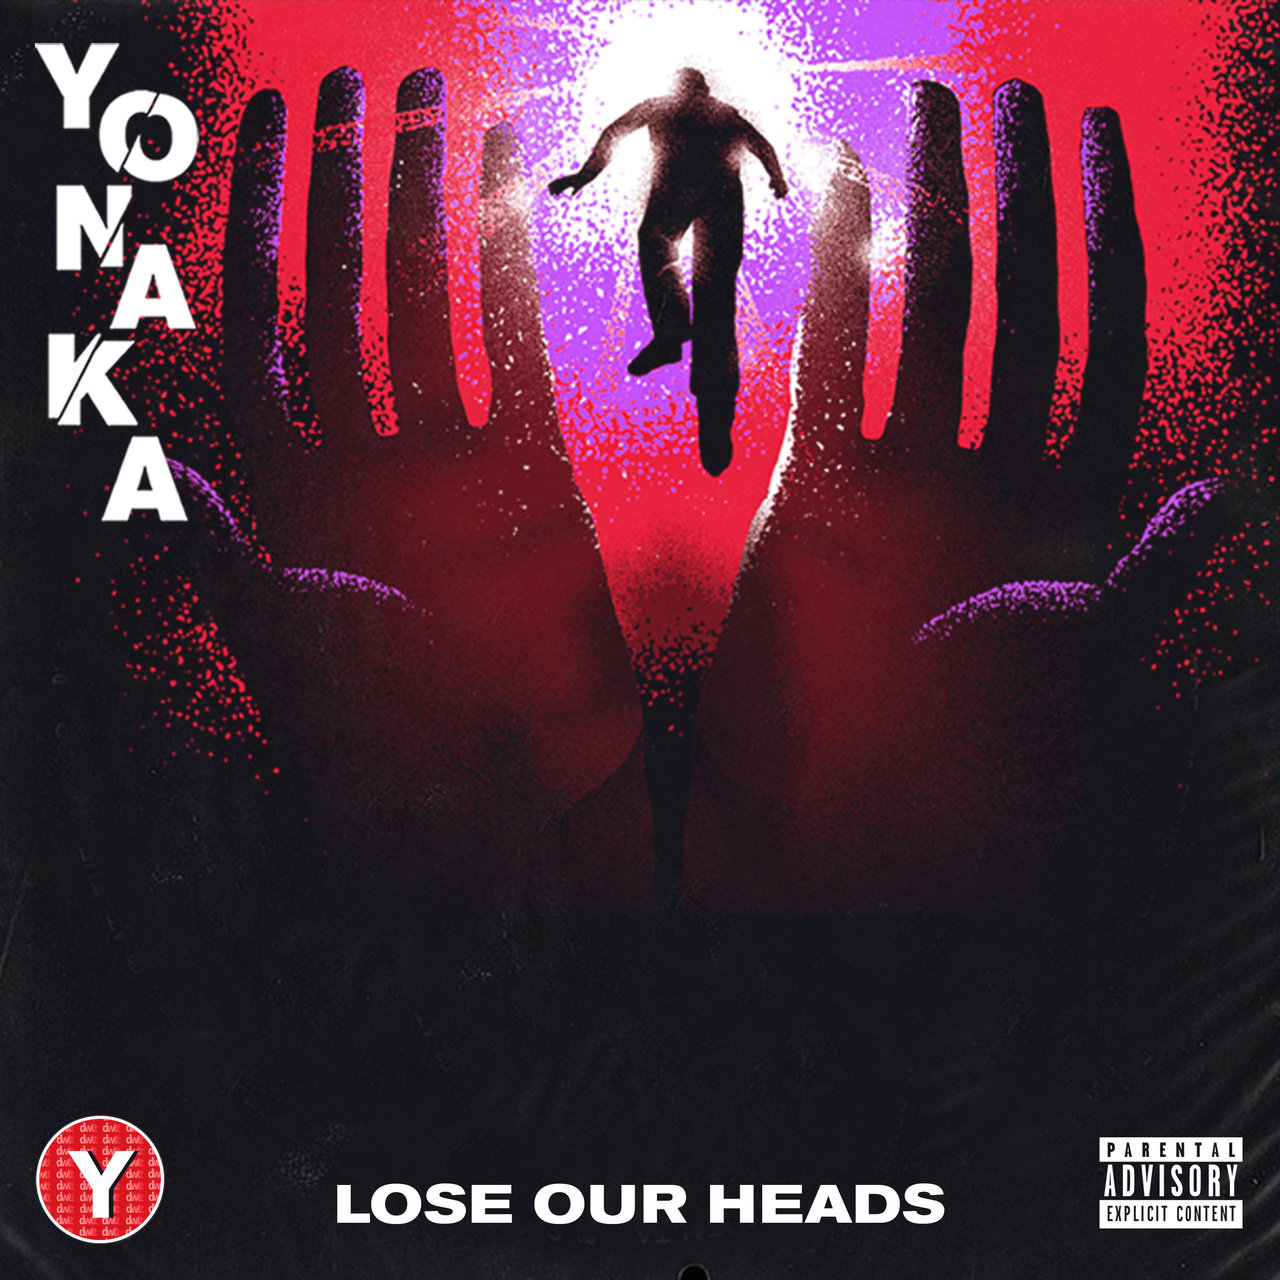 YONAKA — Lose Our Heads cover artwork